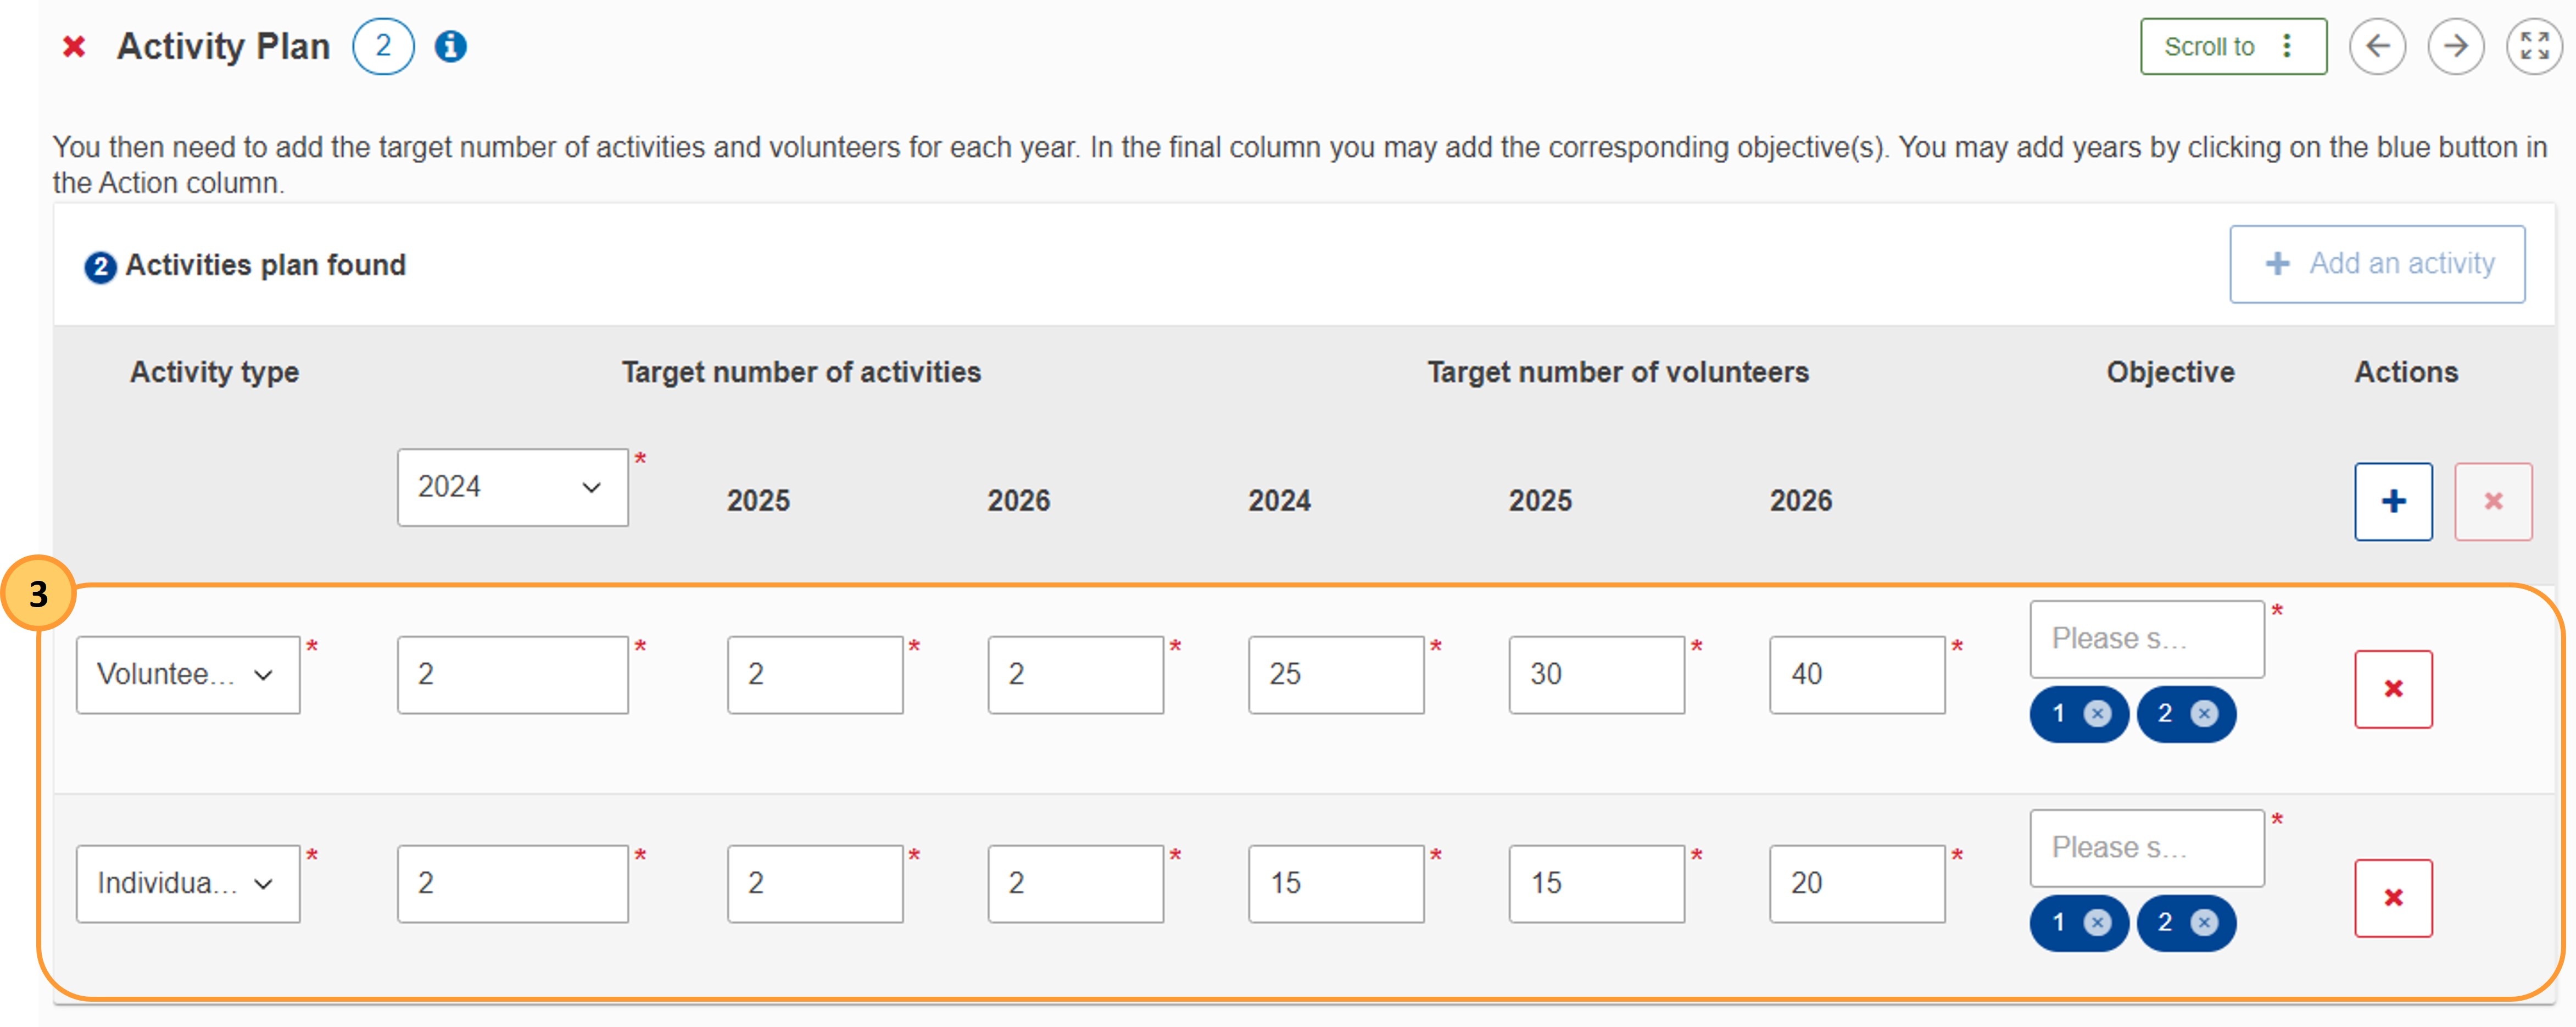 Fill in the target number of activities and volunteers